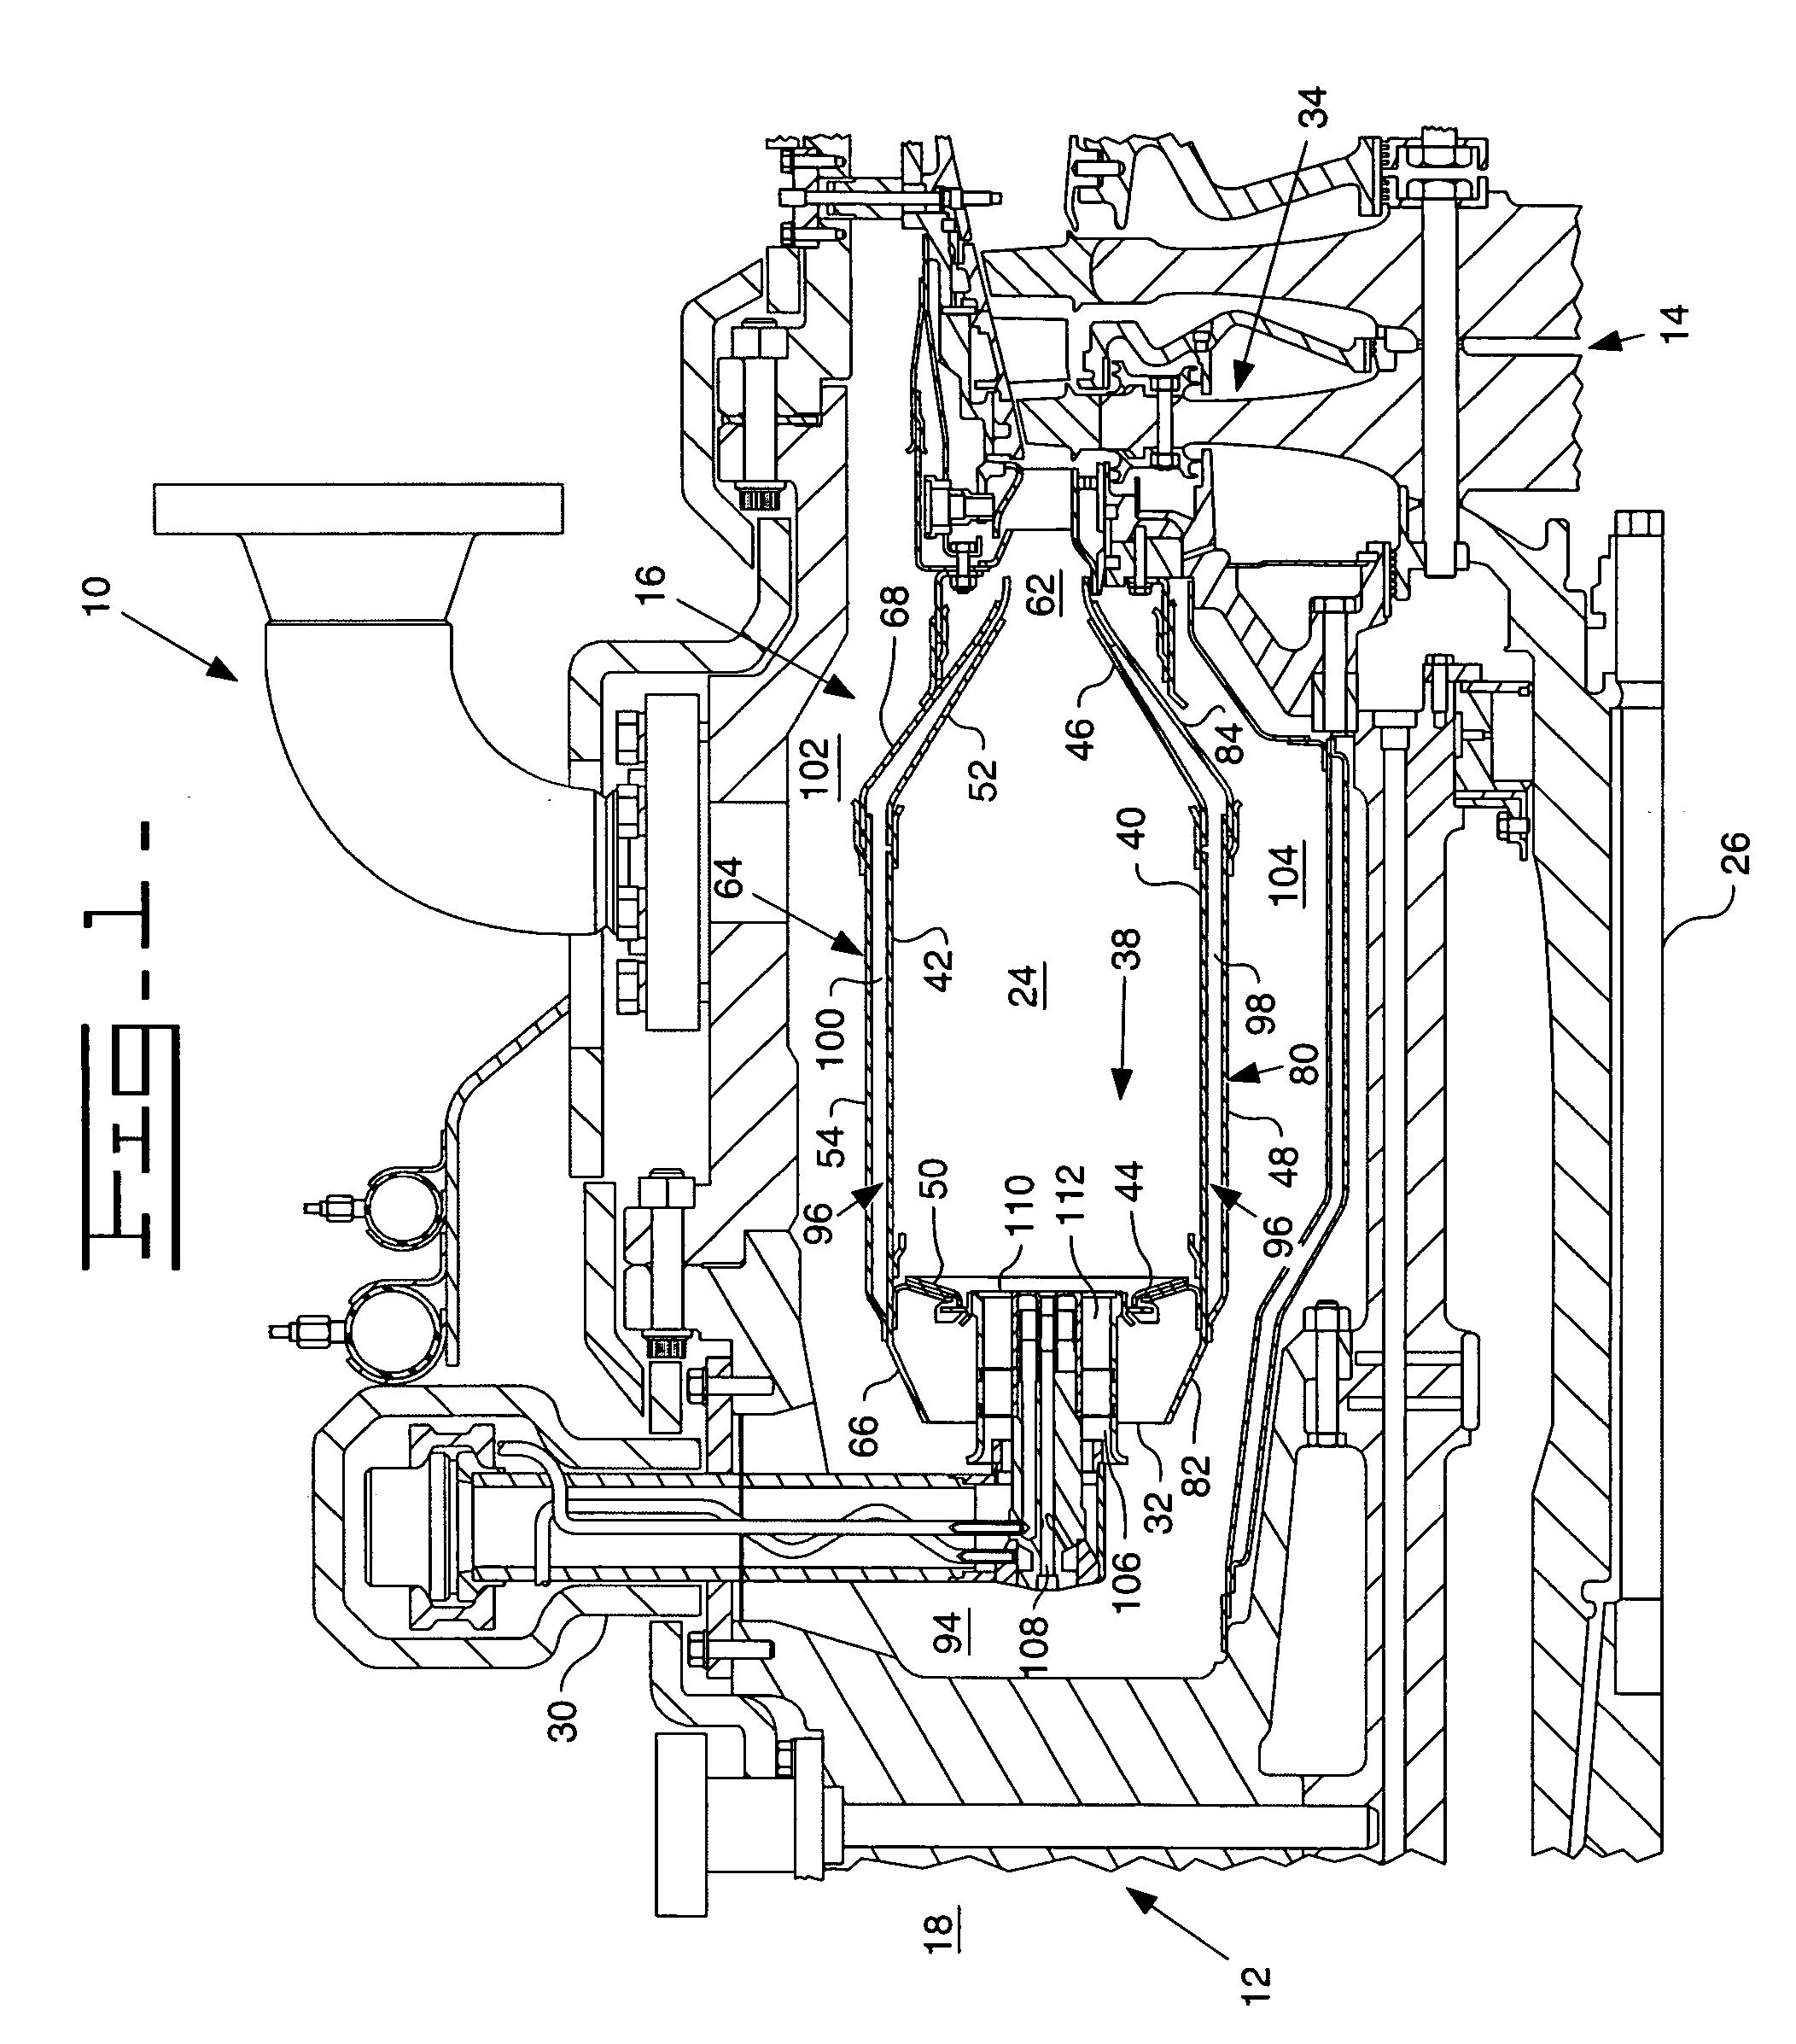 System and method for attenuating combustion oscillations in a gas turbine engine